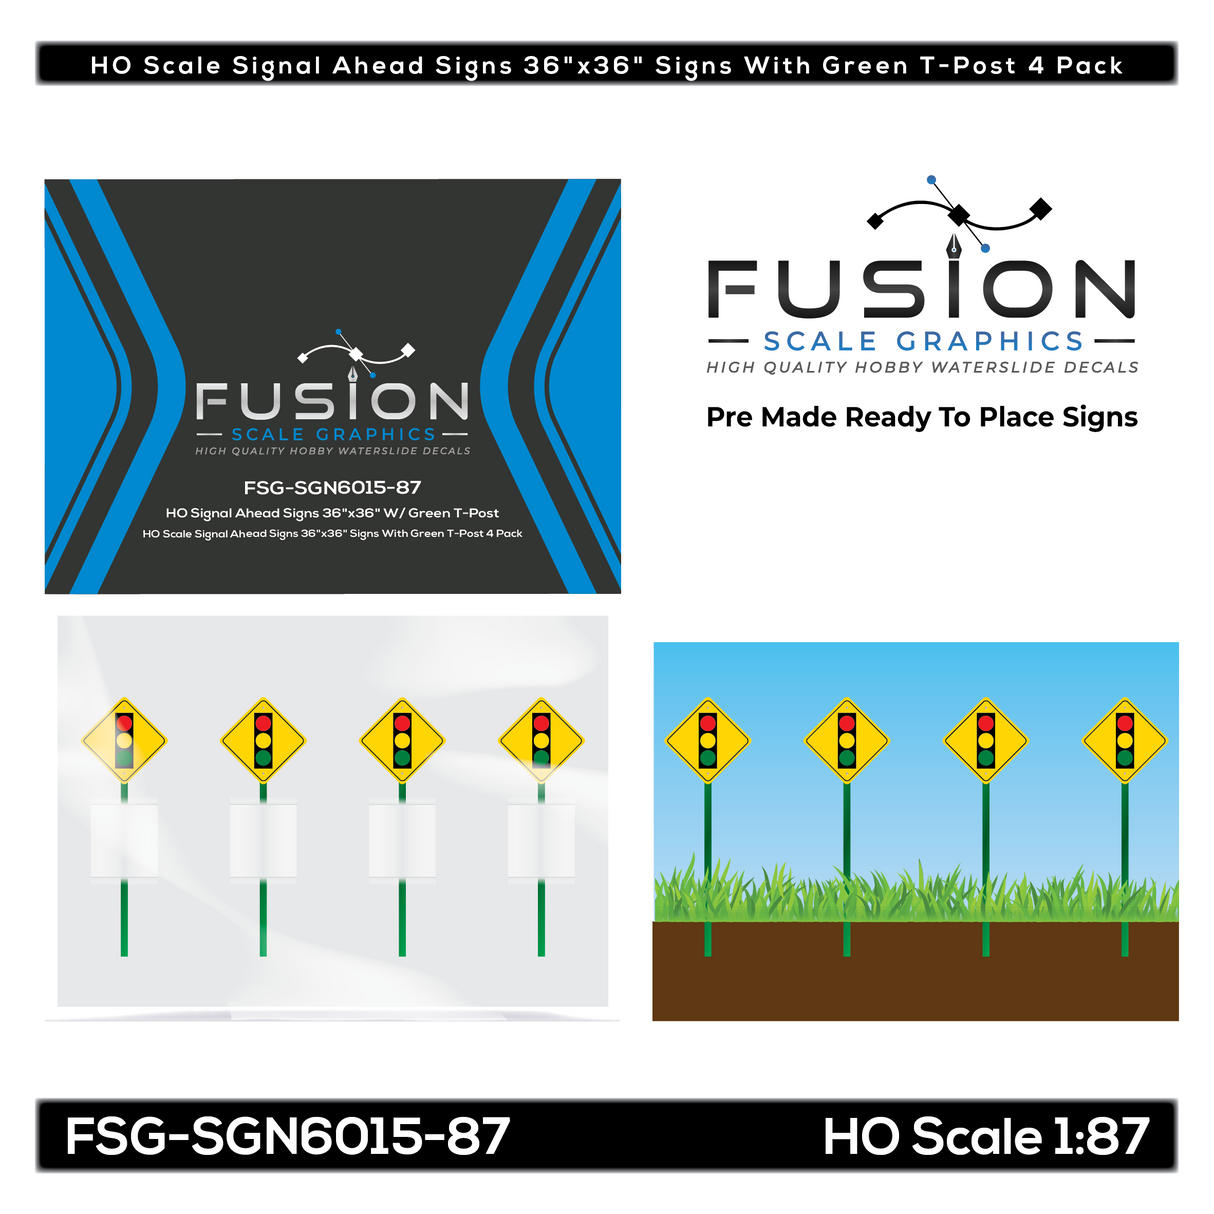 HO Scale Signal Ahead Signs 36"x36" Signs With Green T-Post 4 Pack